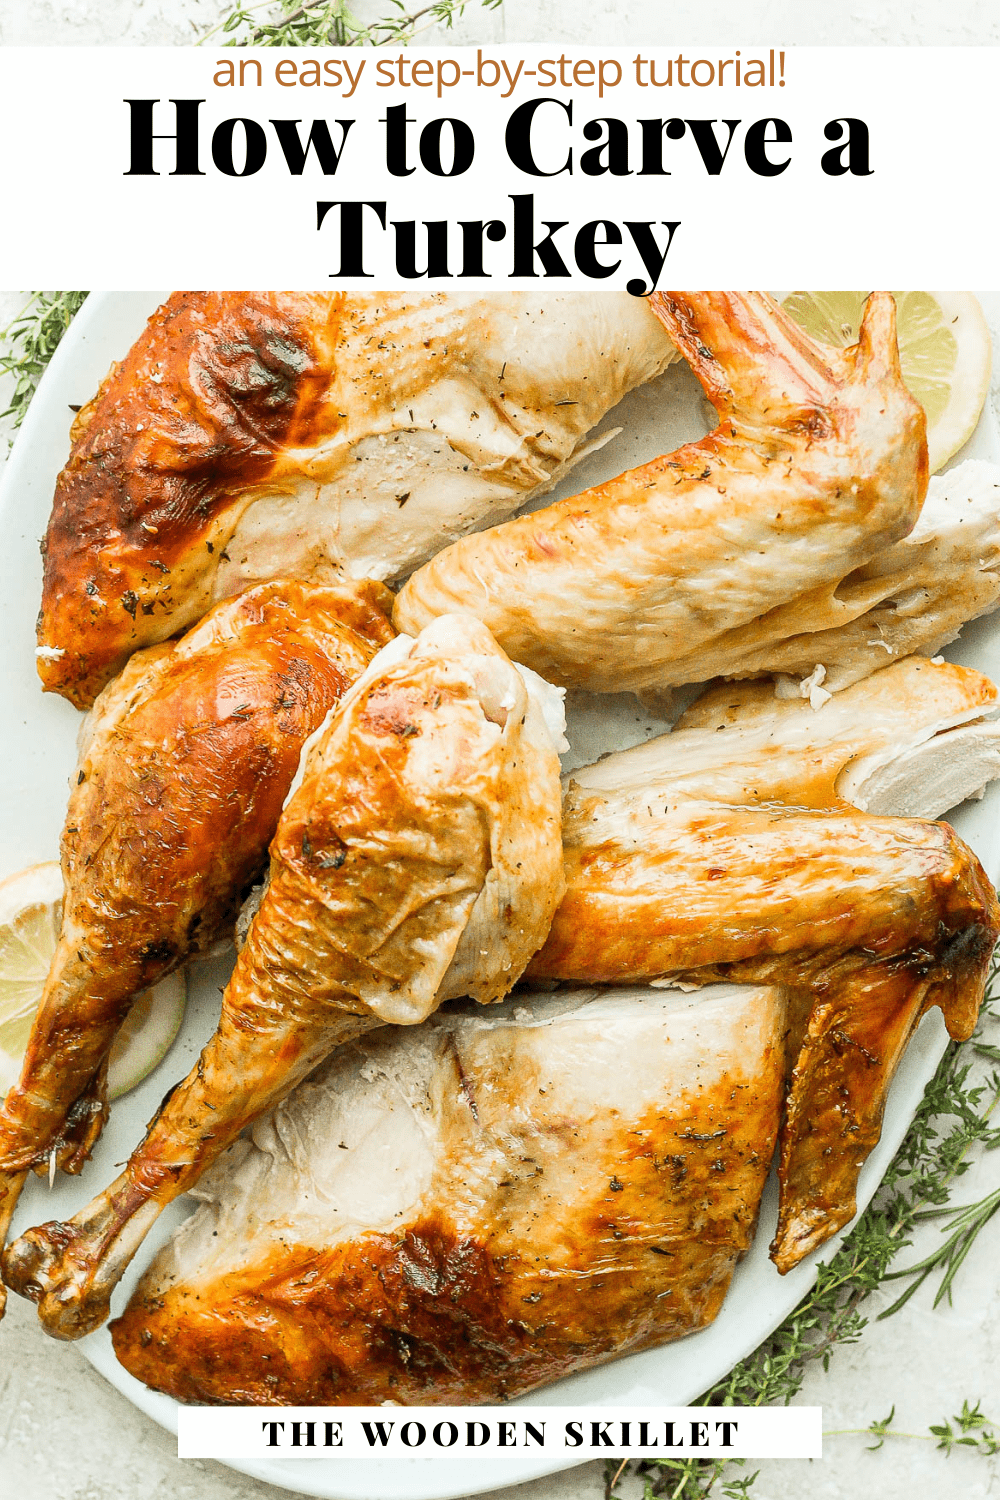 Pinterest image for how to carve a turkey.